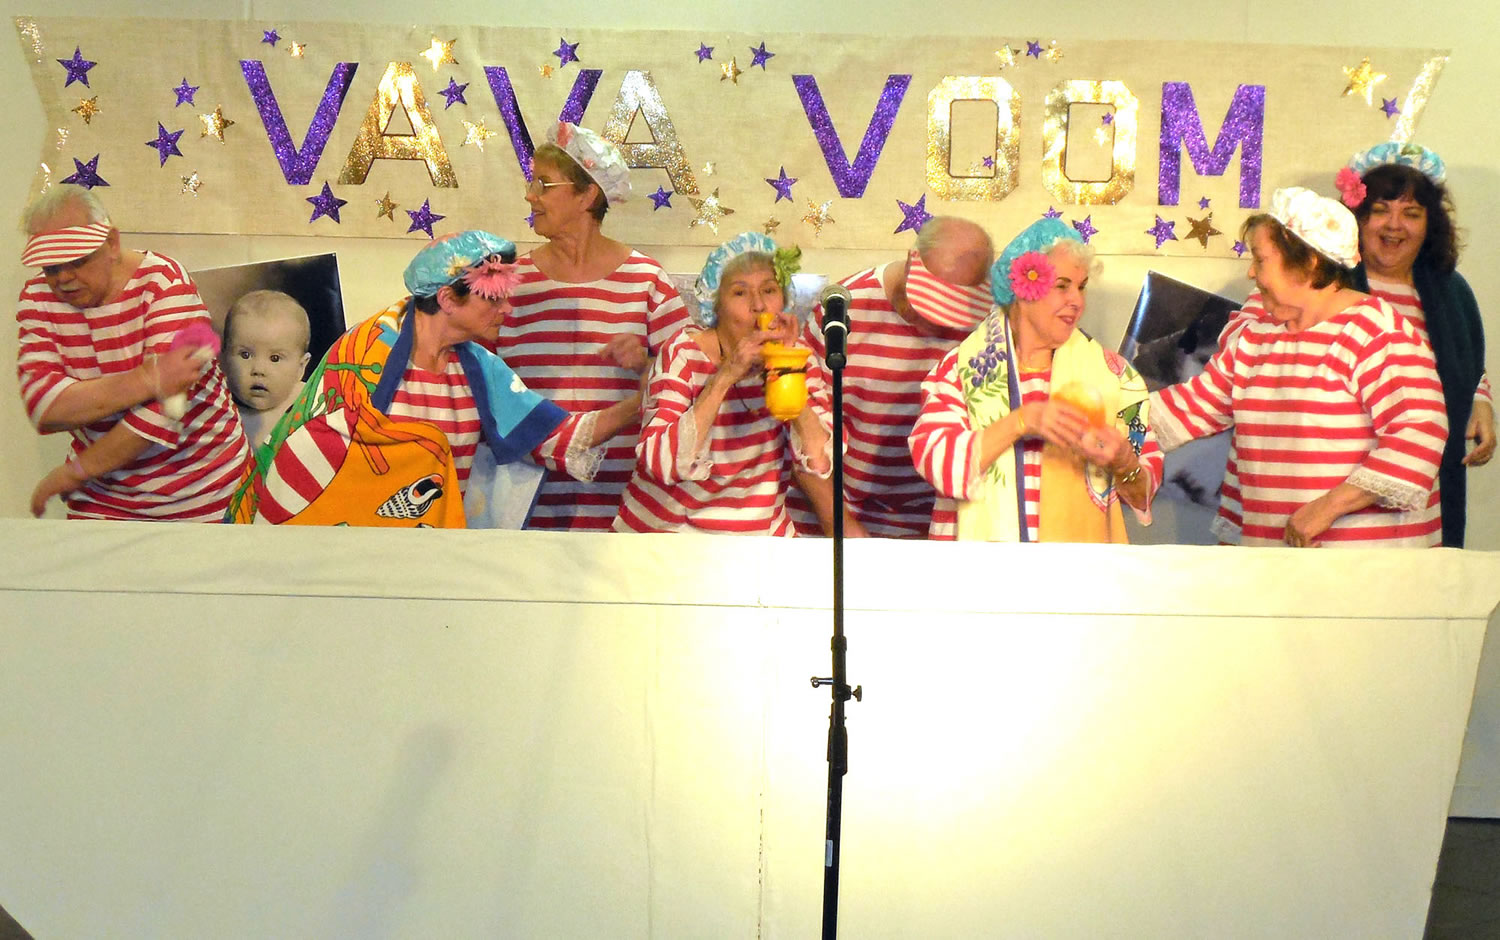 Barberton: The senior-citizen vaudeville-style troupe known as Va Va Voom cleaned up its act on April 27.